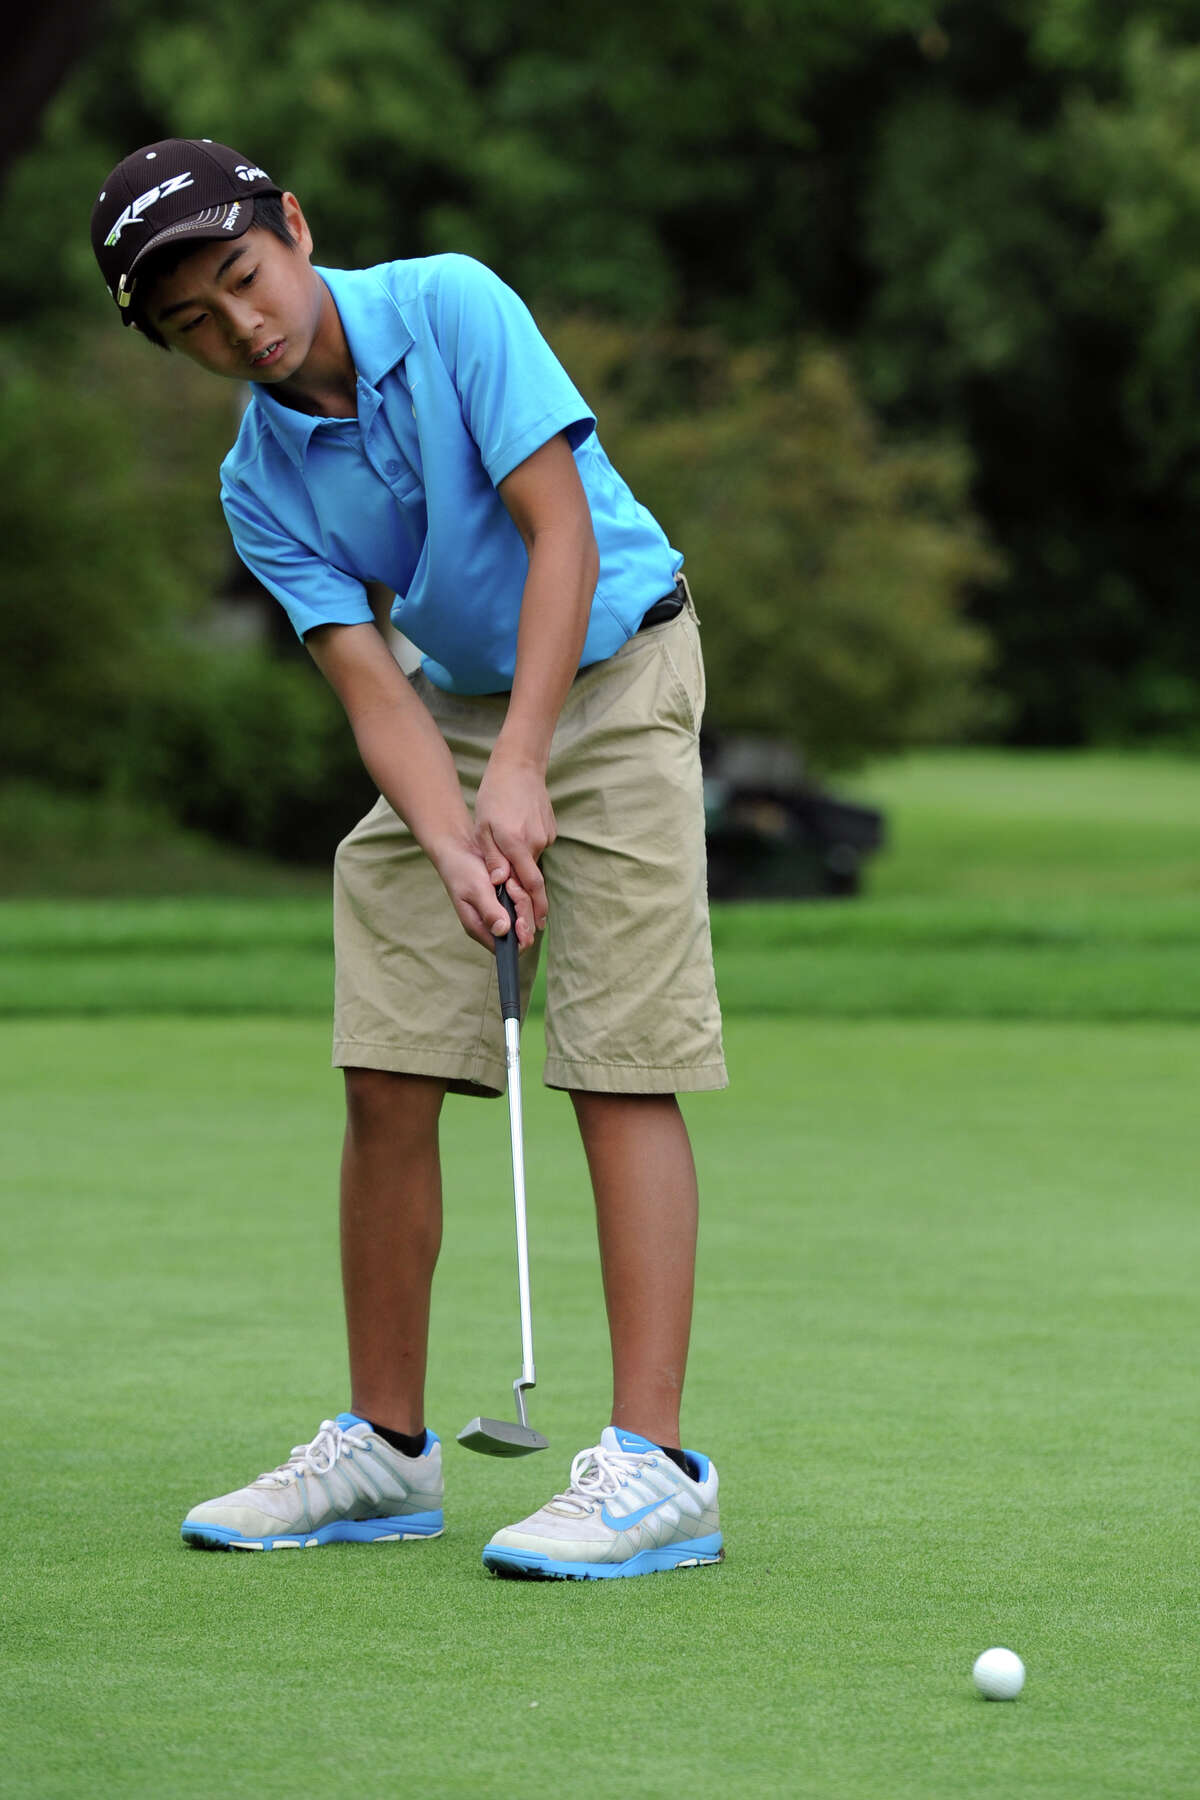 Ryan Mondonedo, of New Milford, putts during the Fran McCarthy Junior Golf Tournament at the Richter Park Golf Course, in Danbury, Conn. Aug. 18, 2014. Mondonedo is scheduled to compete in this year's event, set for Monday.